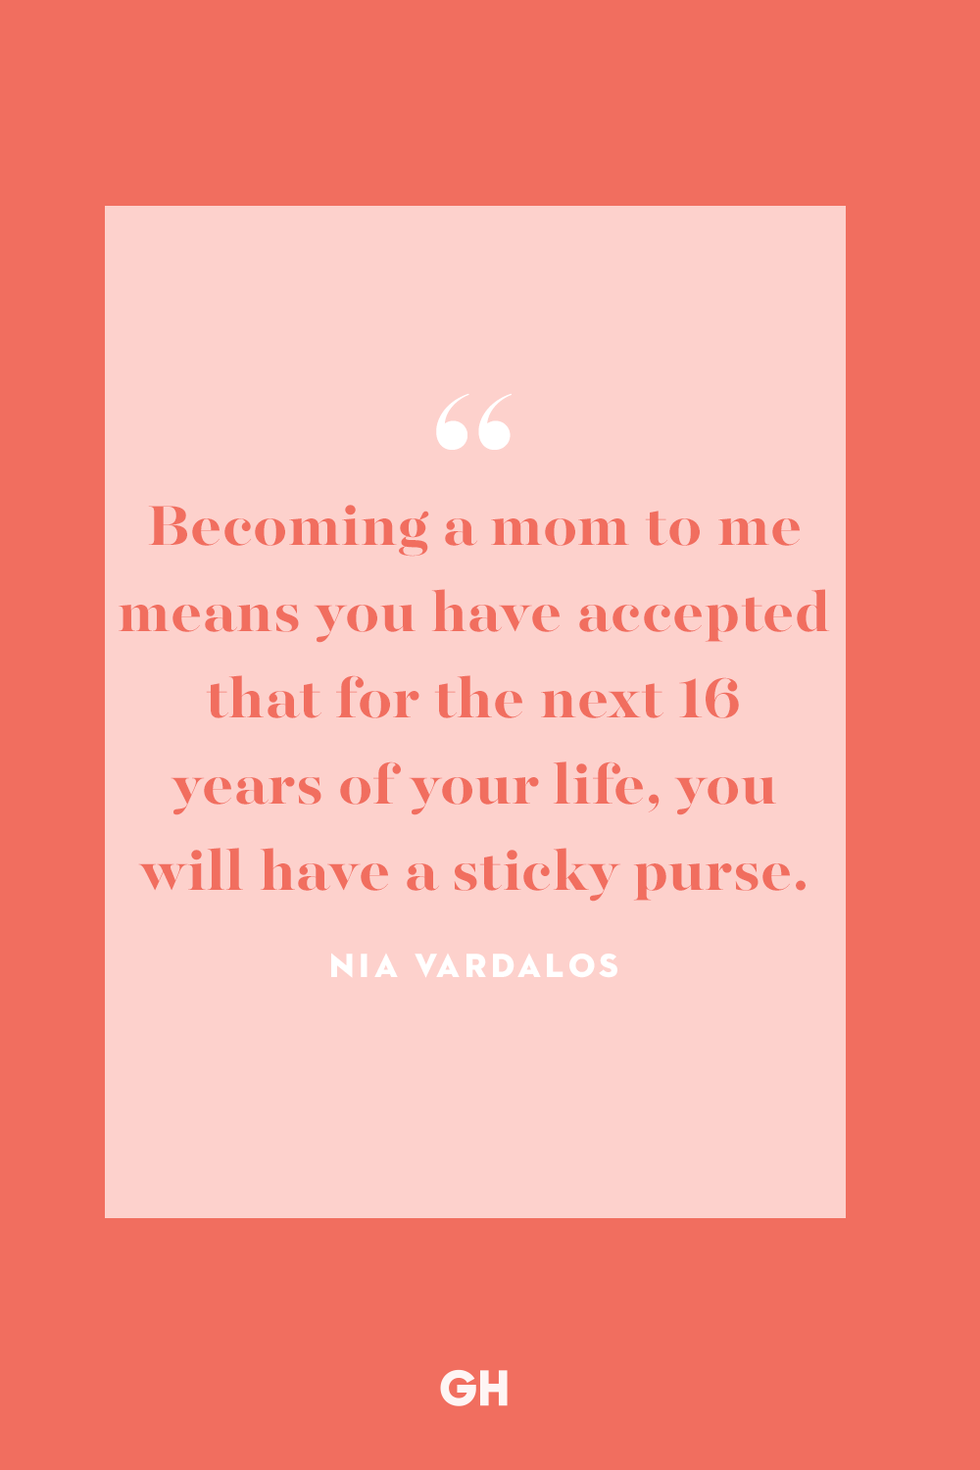 https://hips.hearstapps.com/hmg-prod/images/funny-celebrity-mom-quotes-nia-vardalos-1648065657.png?crop=1xw:1xh;center,top&resize=980:*